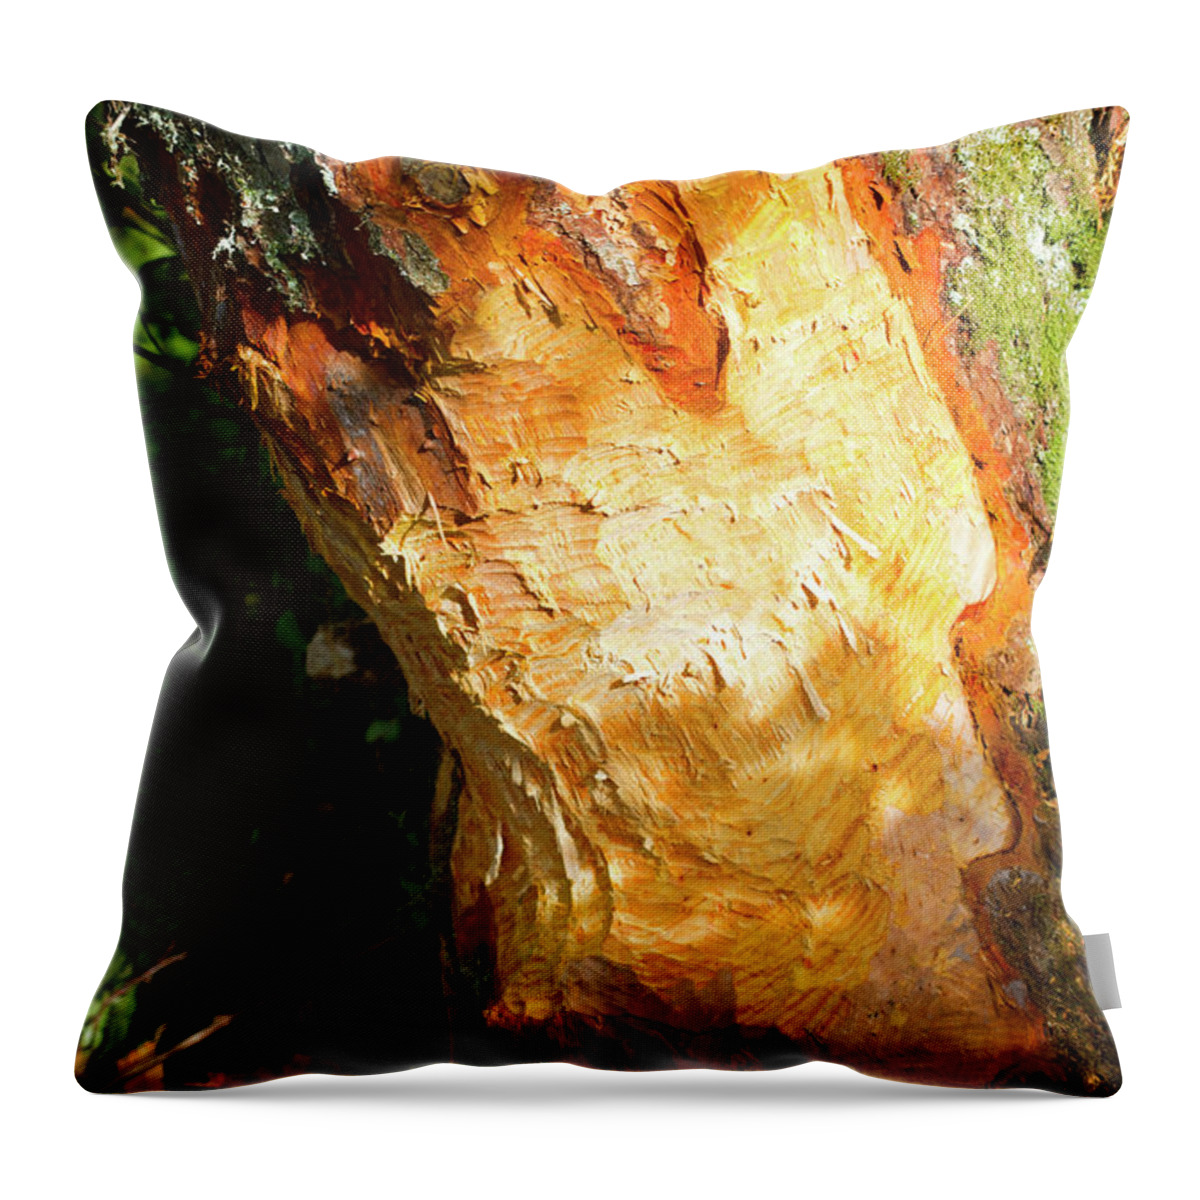 Plant Throw Pillow featuring the photograph Alder Tree Eaten At Its Base By Beaver Bevis Trust #1 by David Woodfall / Naturepl.com